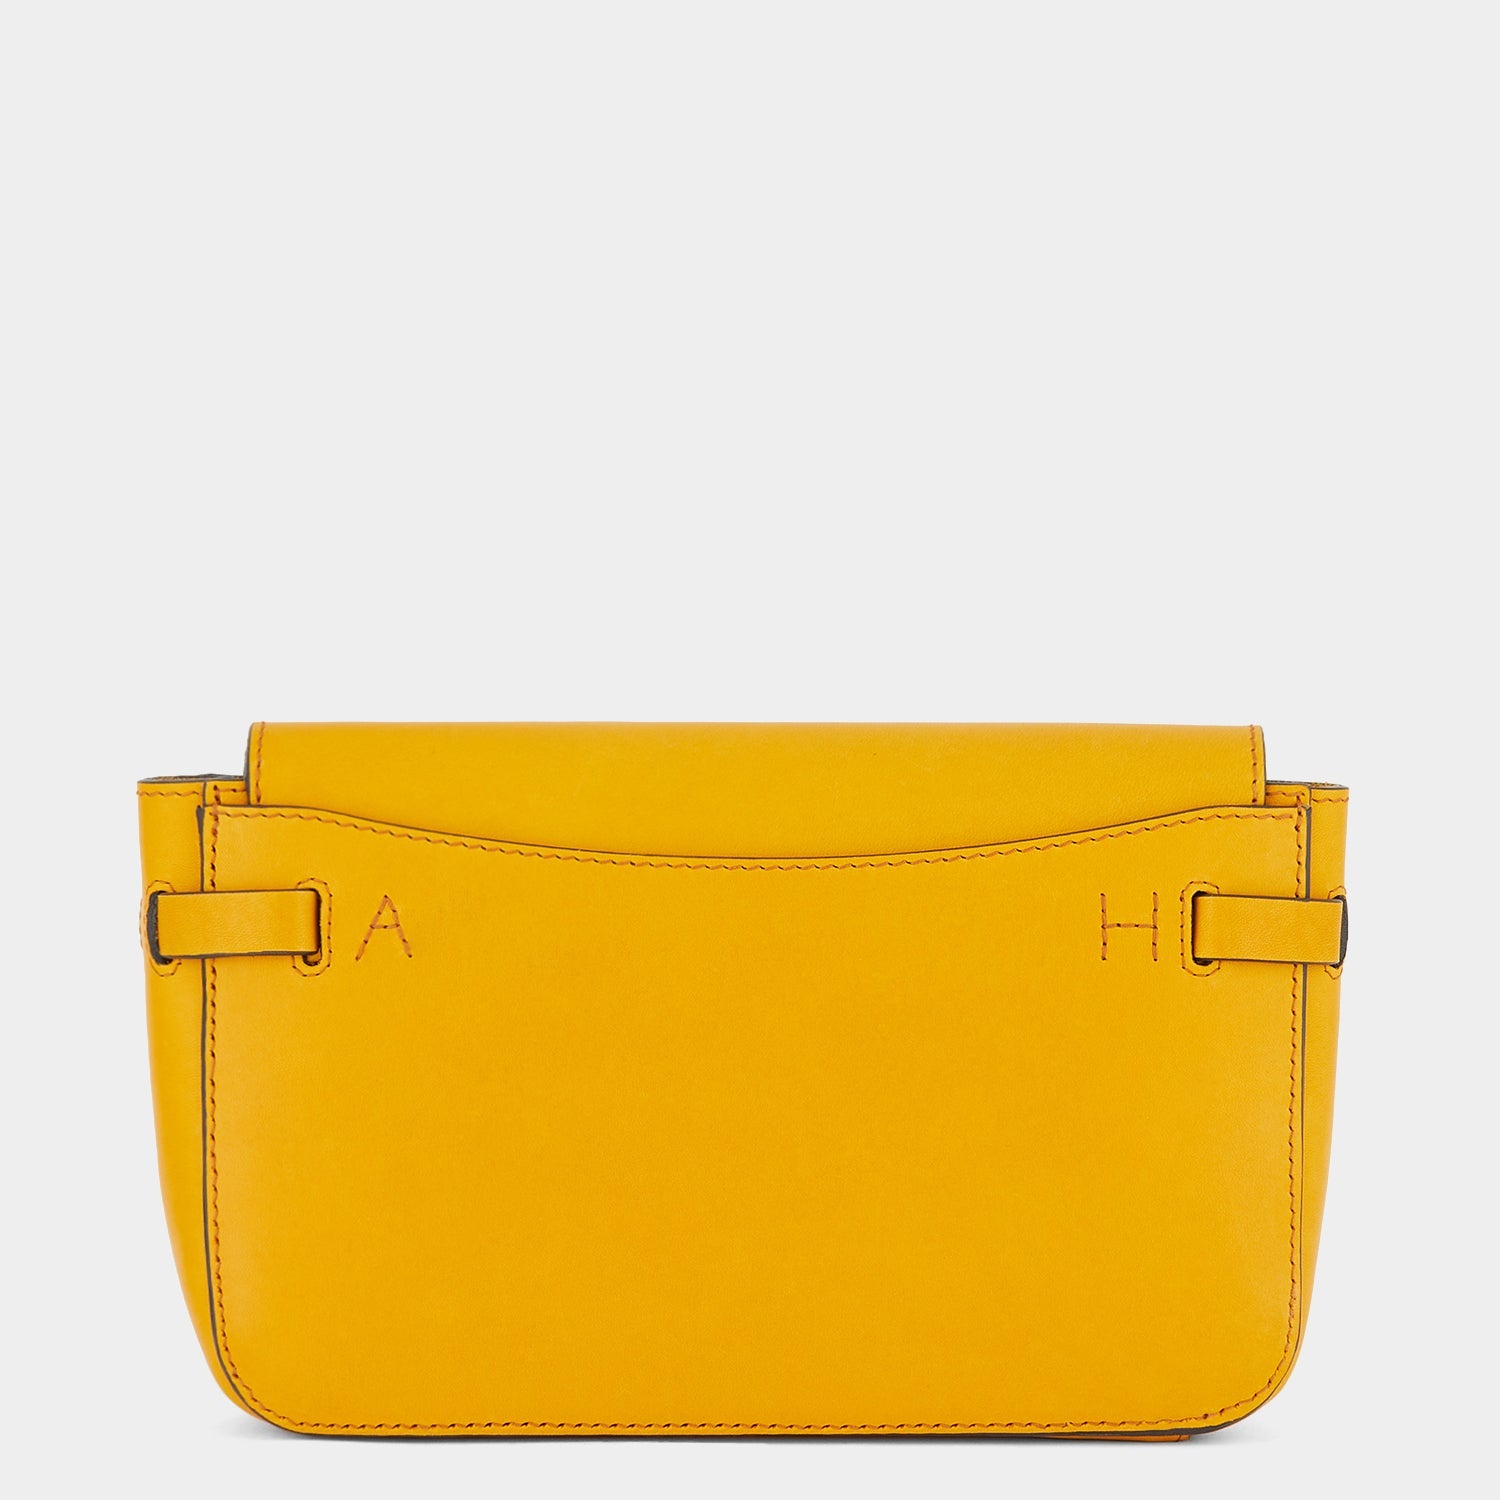 Return to Nature Clutch -

                  
                    Compostable Leather in Honey -
                  

                  Anya Hindmarch US
